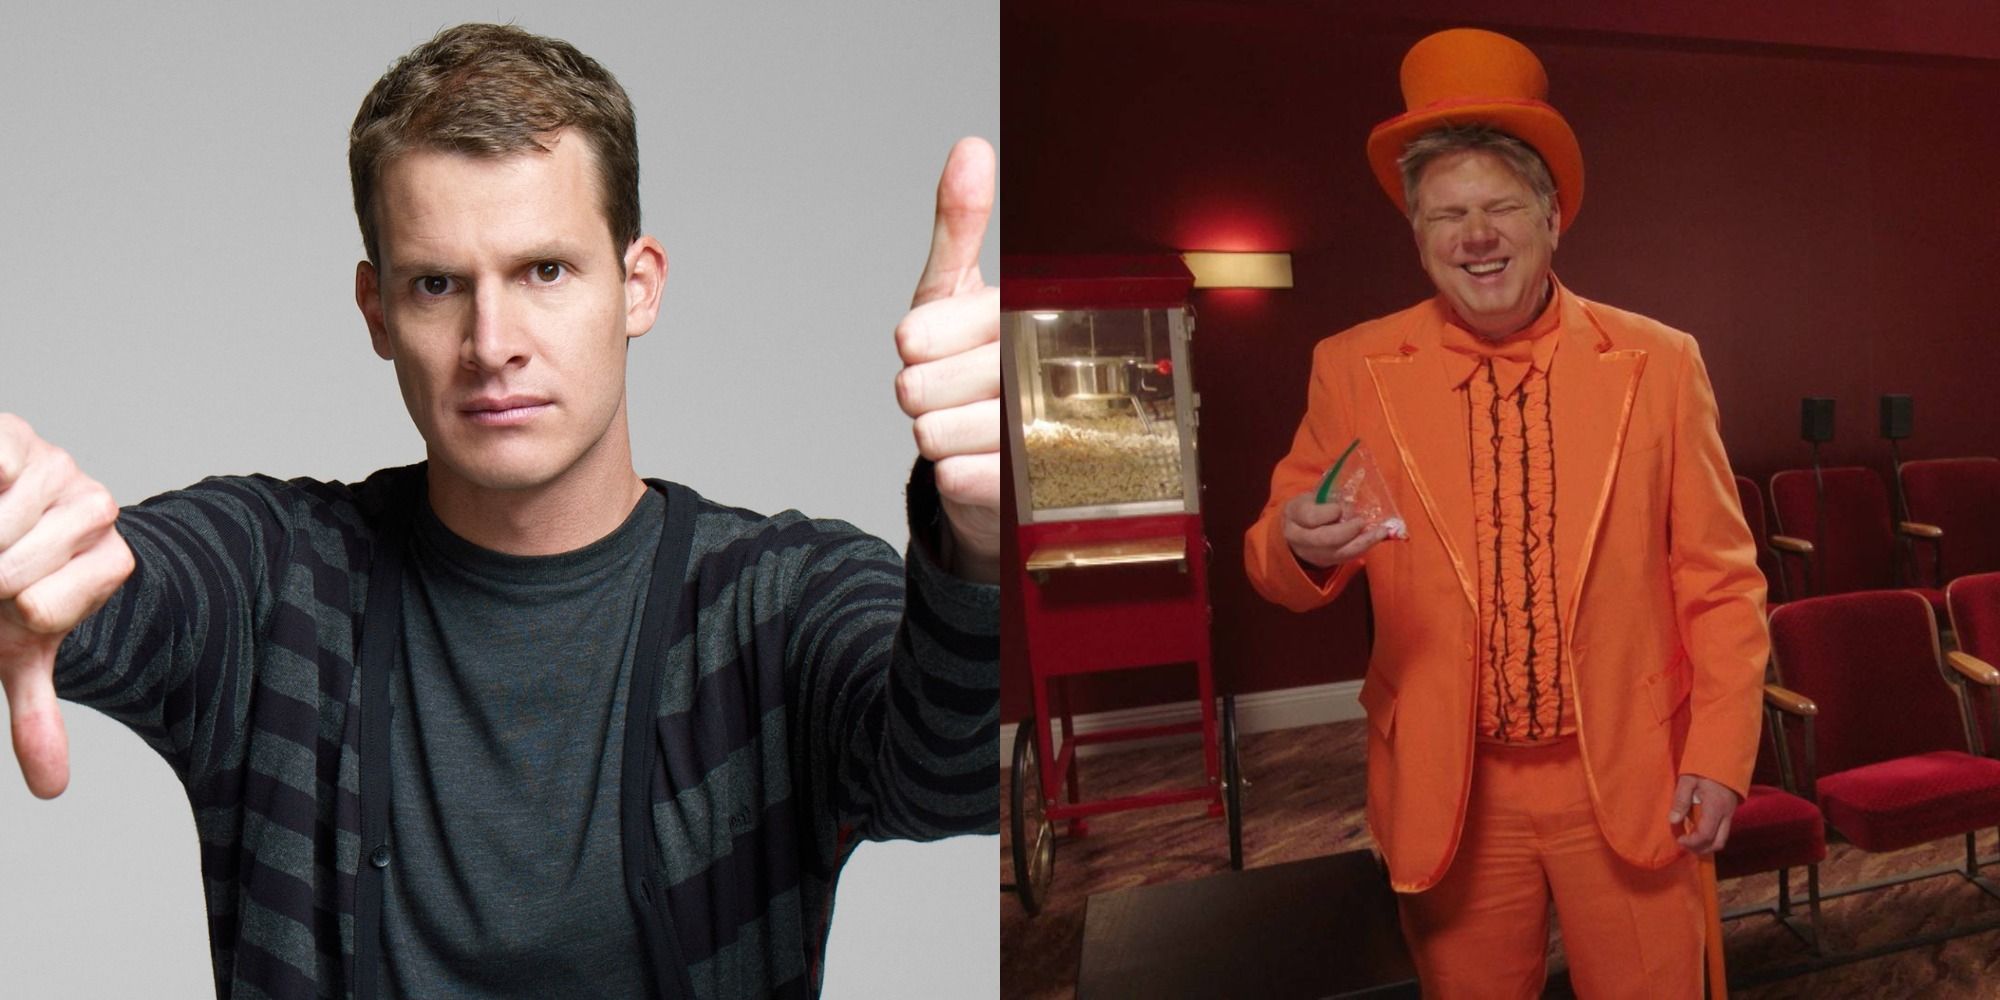 A split image of Daniel Tosh and Tommy Edison wearing an orange suit in Tosh.0